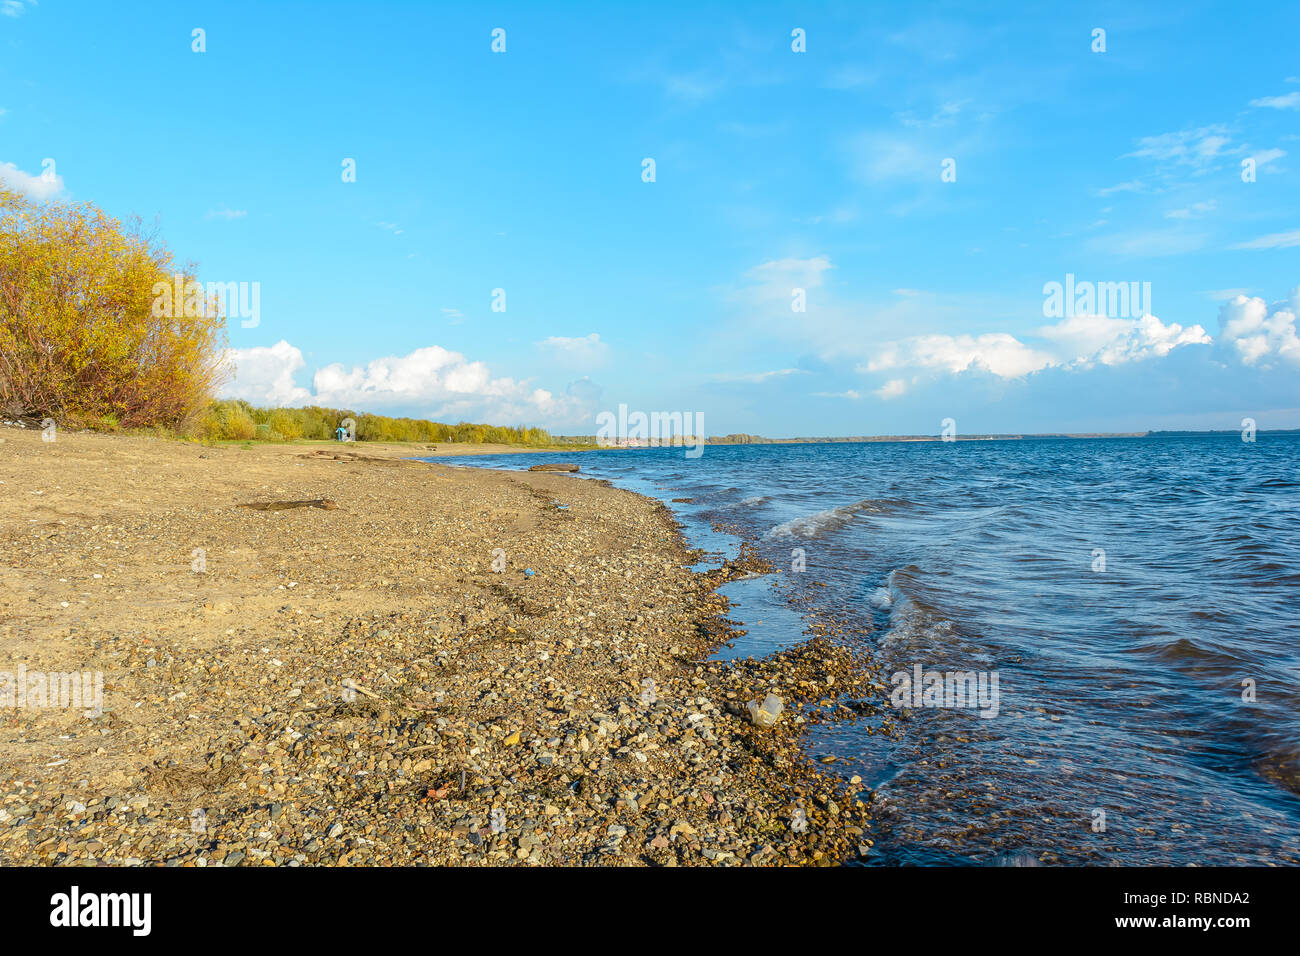 On the banks of the Volga river Stock Photo